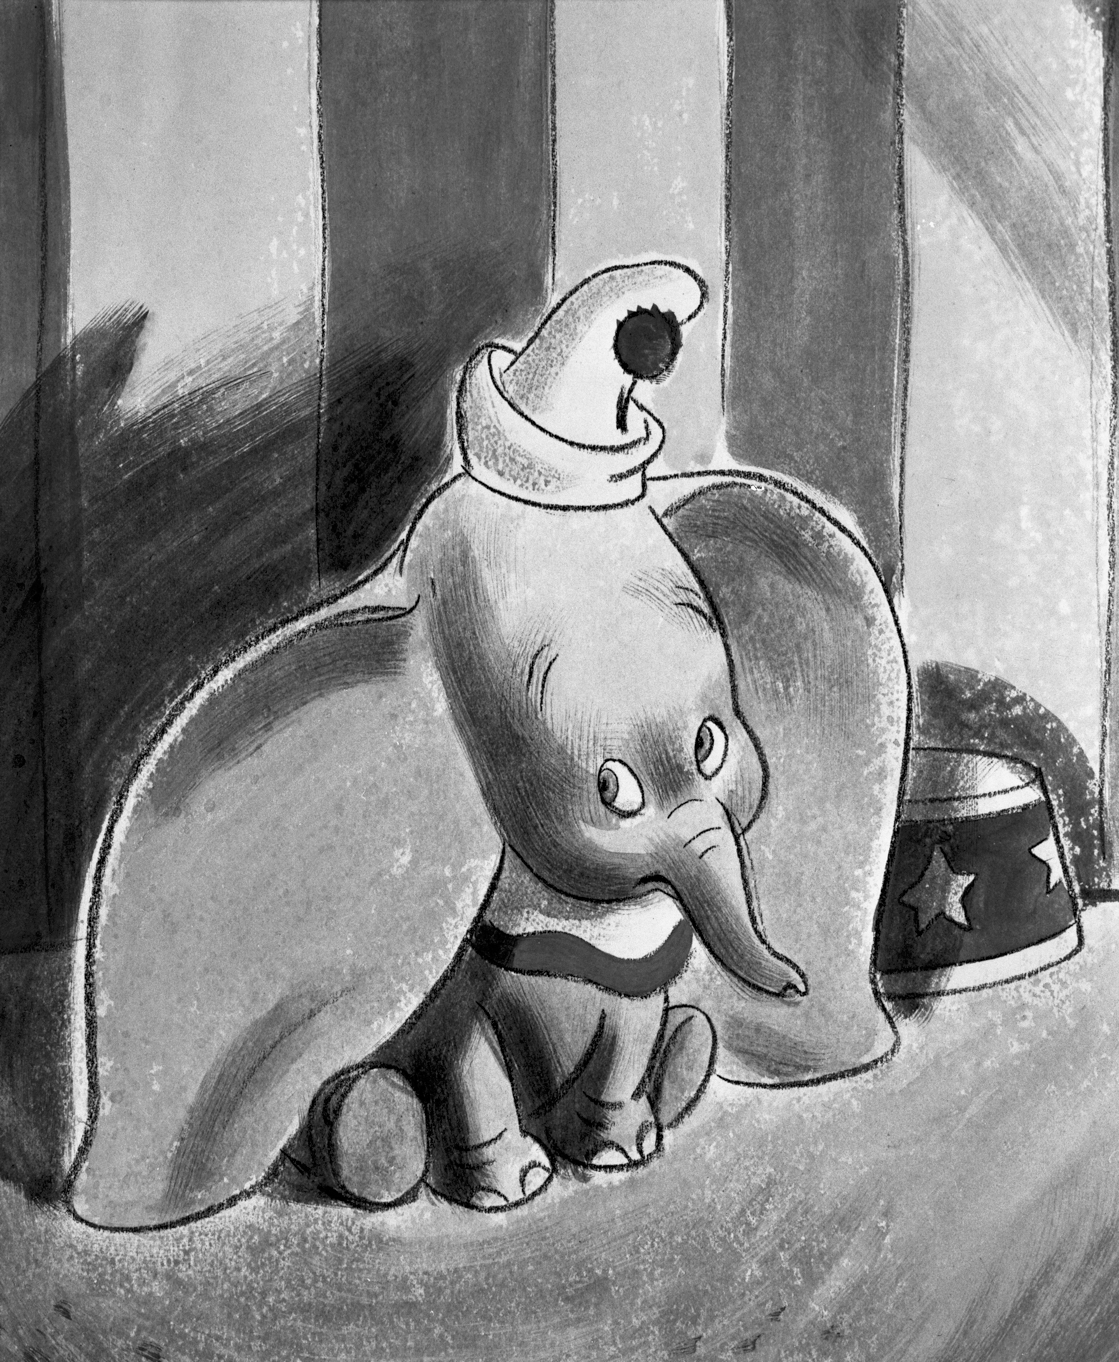 The sketch of Dumbo that almost ran on the cover of Time in 1941. (© Disney)